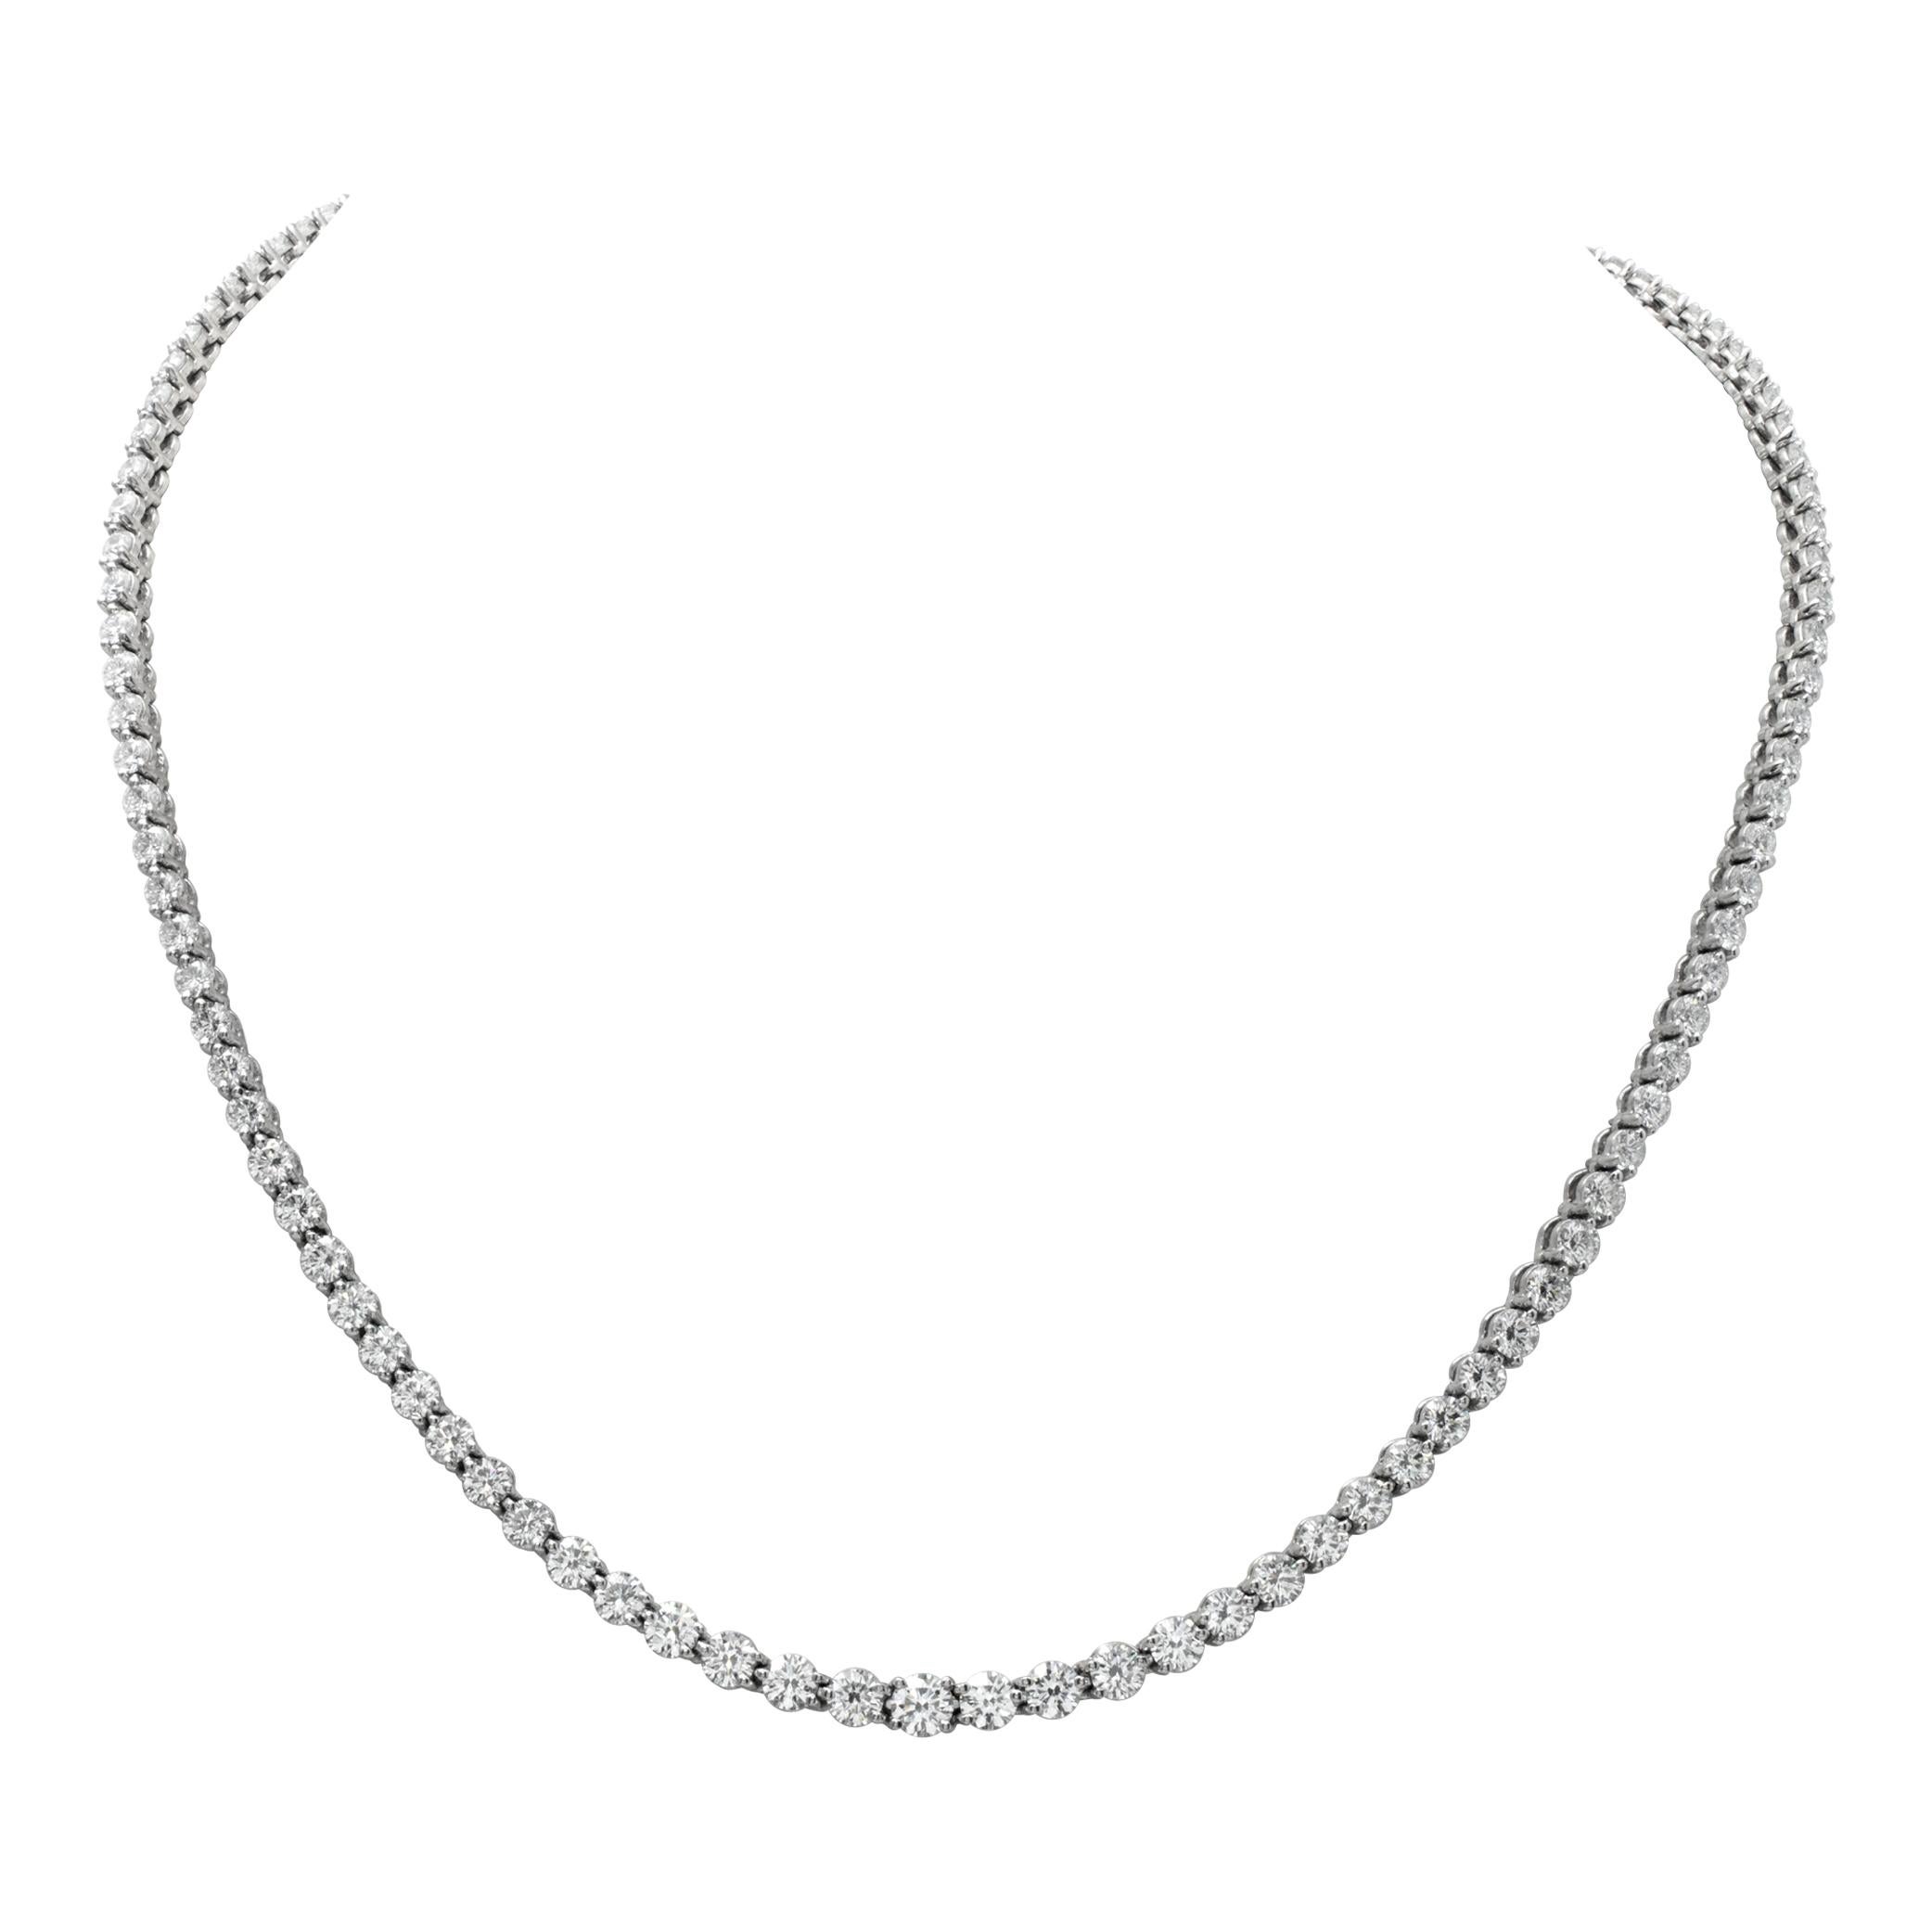 Platinum Tiffany & Co. graduated diamond necklace from the Victoria collection